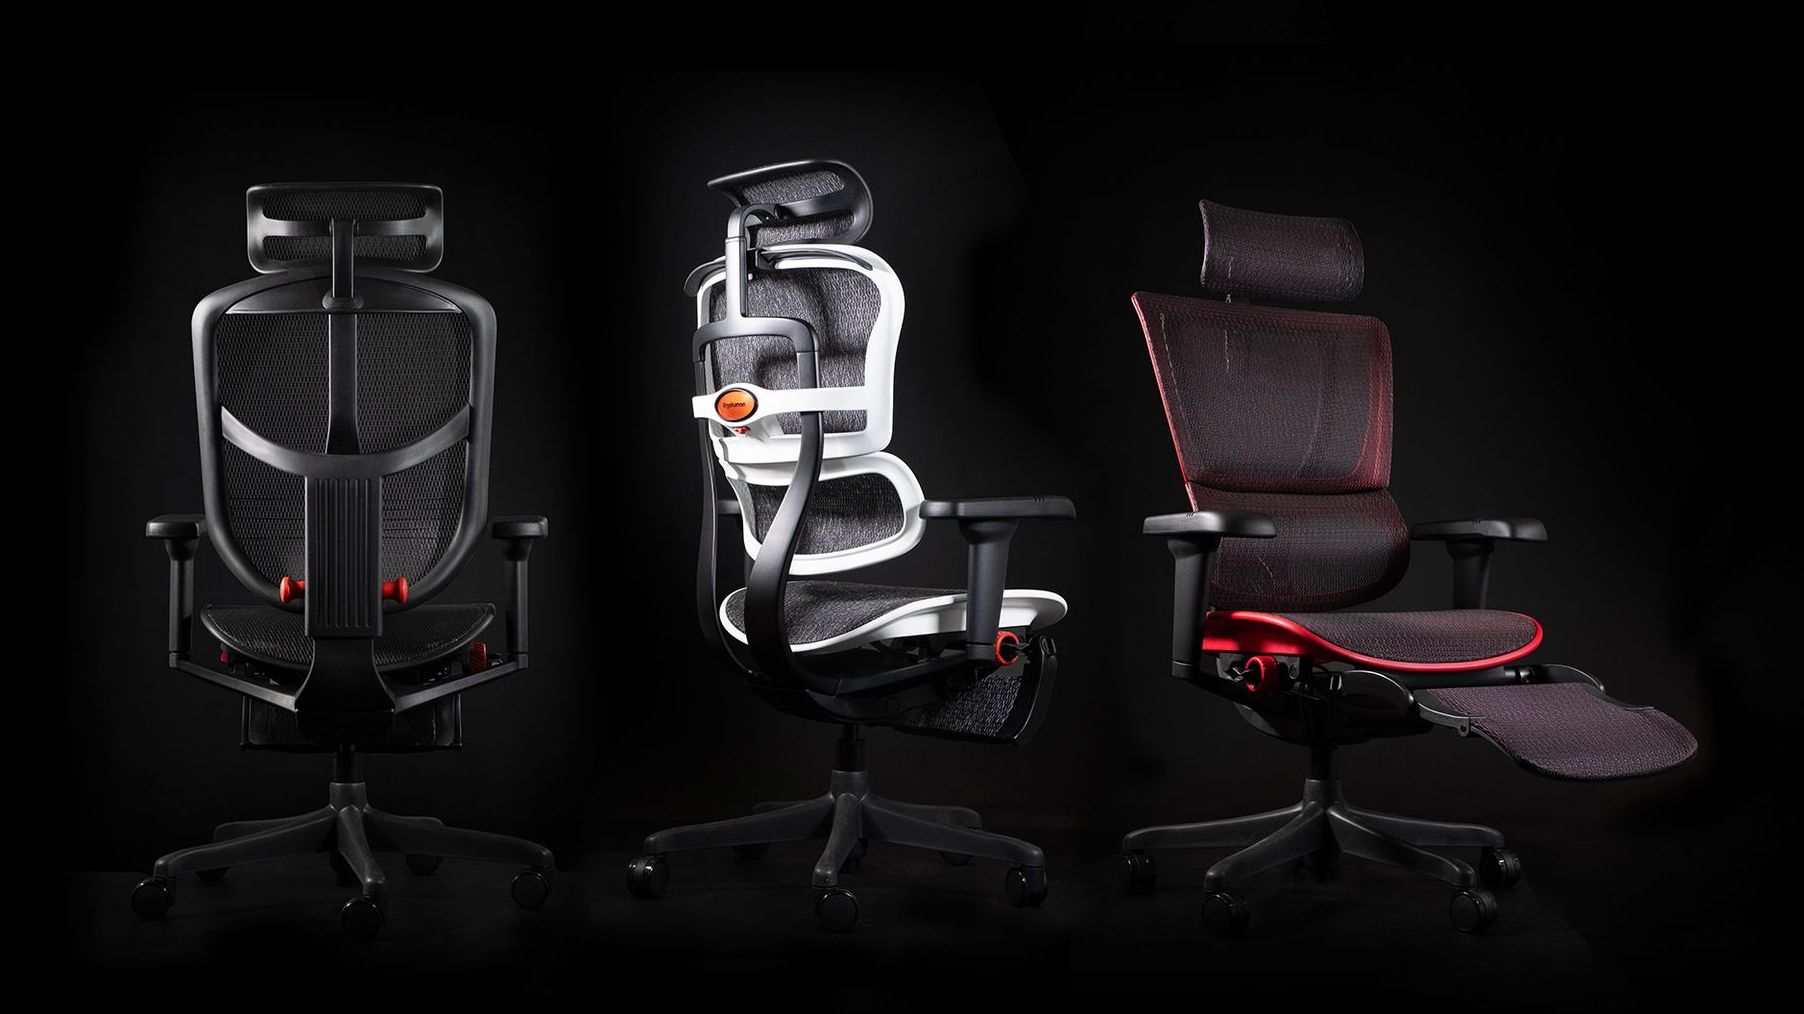 Three mesh gaming chairs - the Enjoy Ultra with black frame, the Ergohuman Ultra with white frame, and the Mirus Ultra with red frame. 